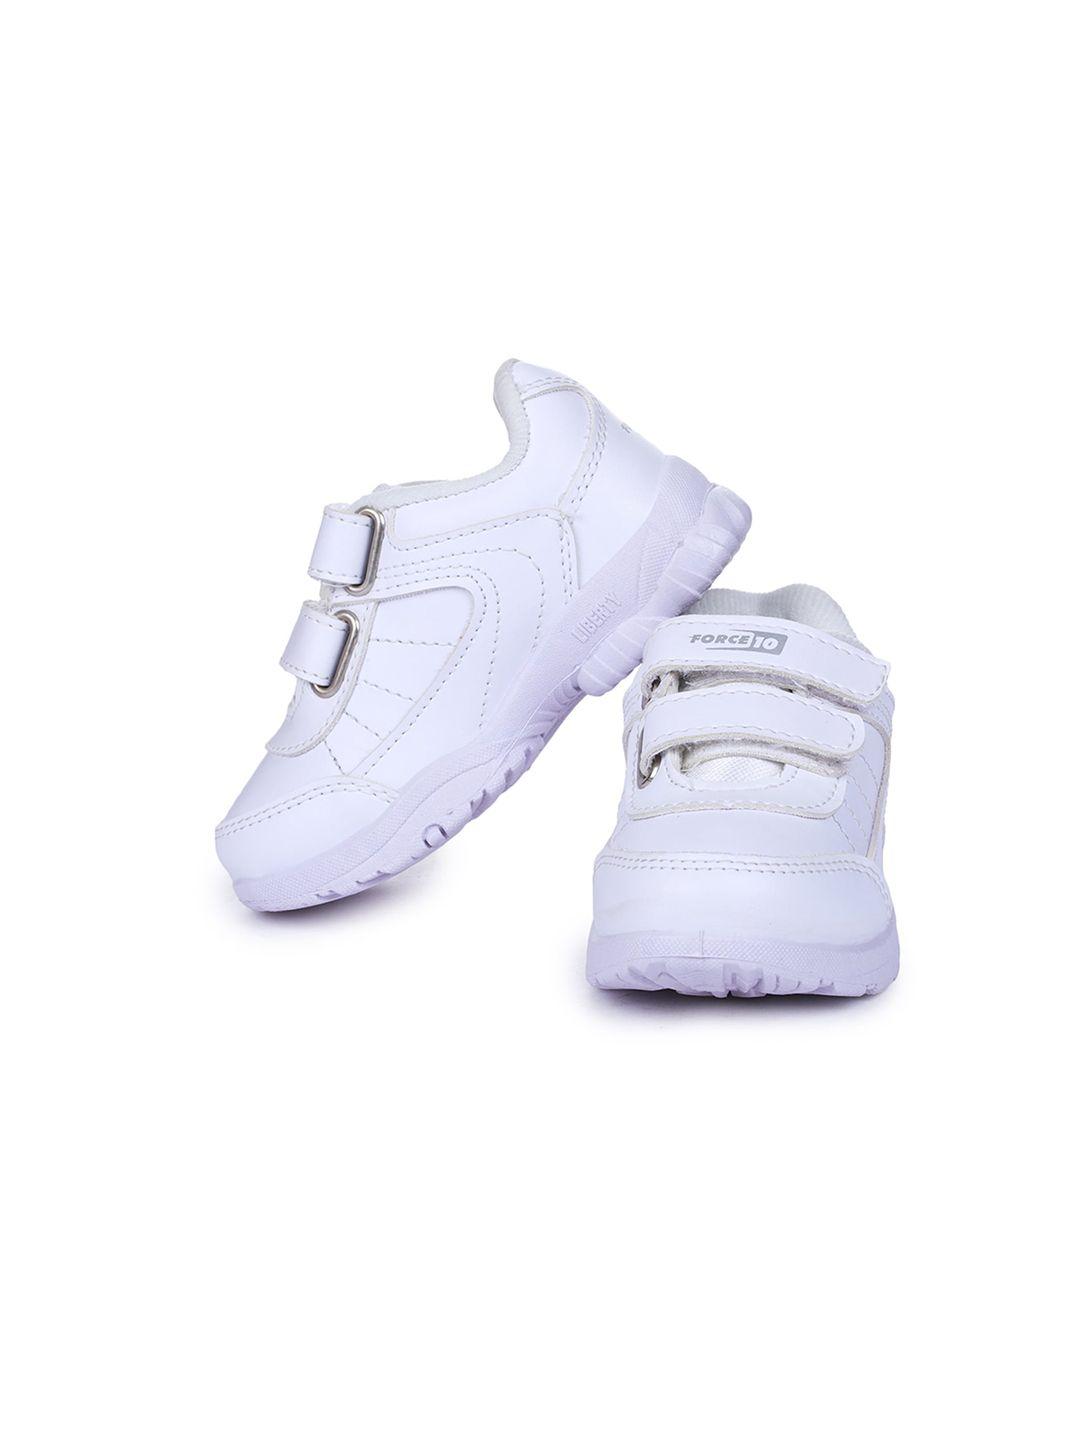 liberty unisex kids white casual sneakers